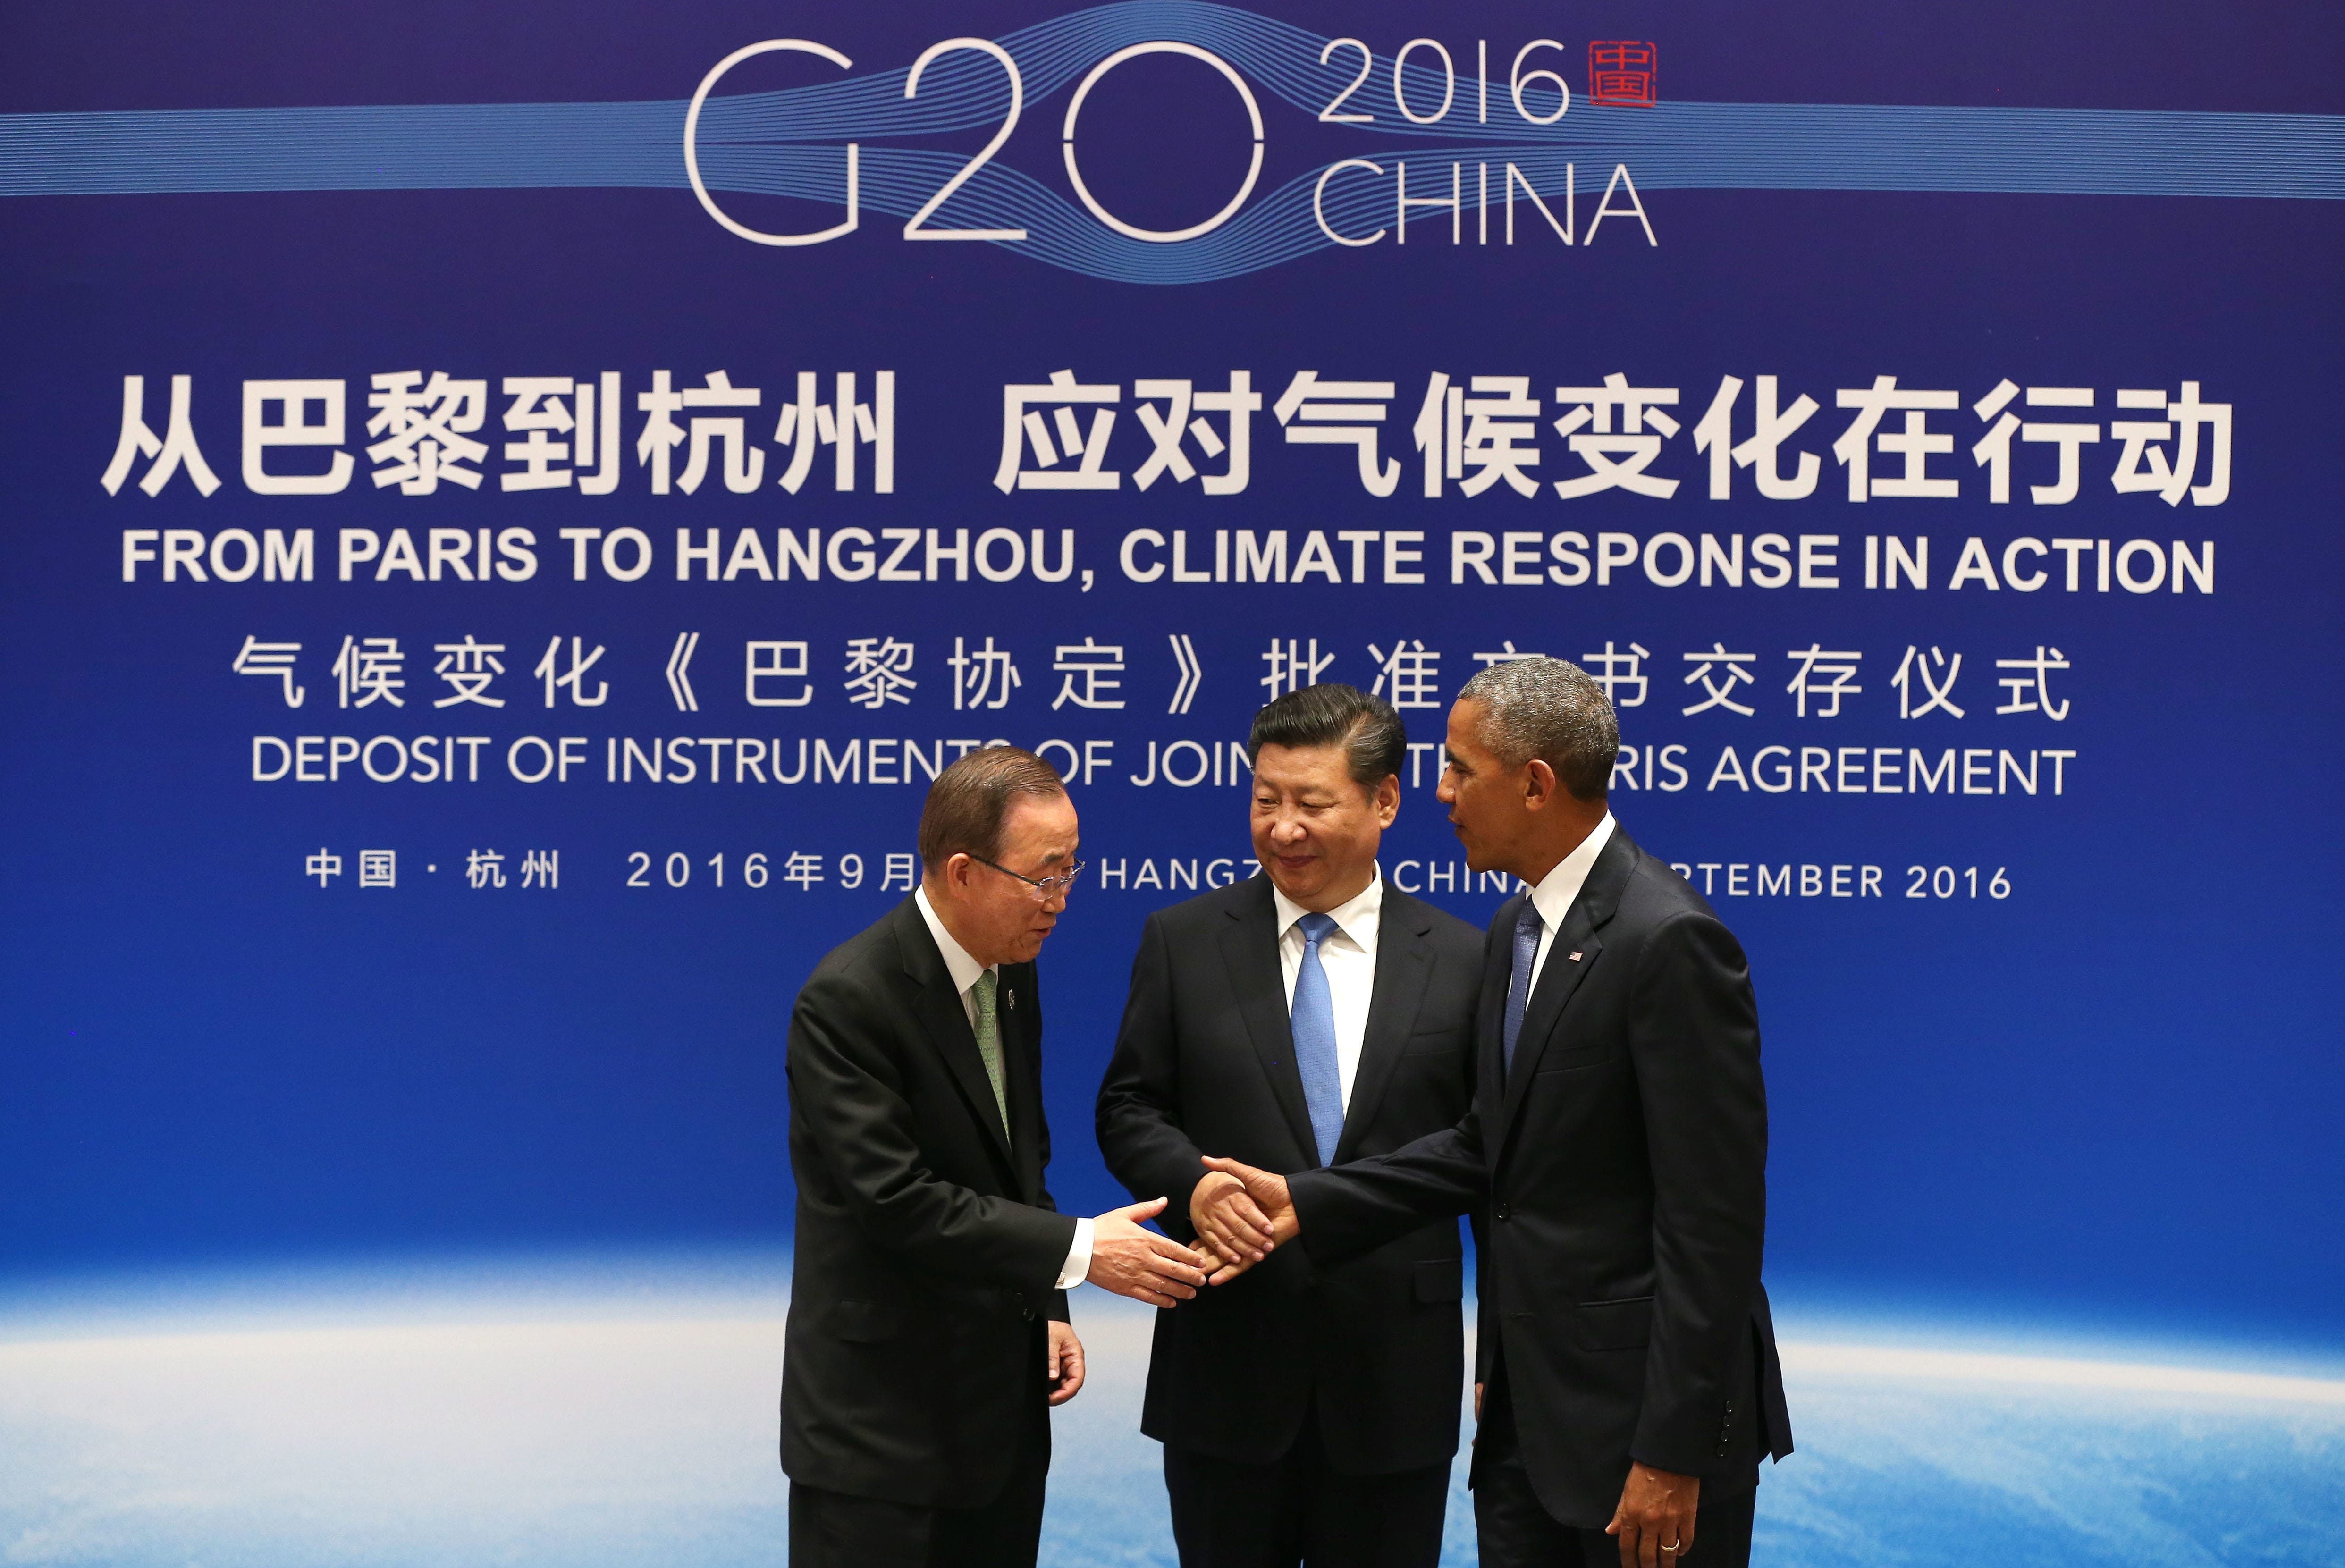 Chinese President Xi Jinping, center, U.S. President Barack Obama, right, and U.N. Secretary-General Ban Ki-moon shake hands during a joint ratification of the Paris climate change agreement at the West Lake State Guest House in Hangzhou in eastern China's Zhejiang province, Saturday, Sept. 3, 2016.